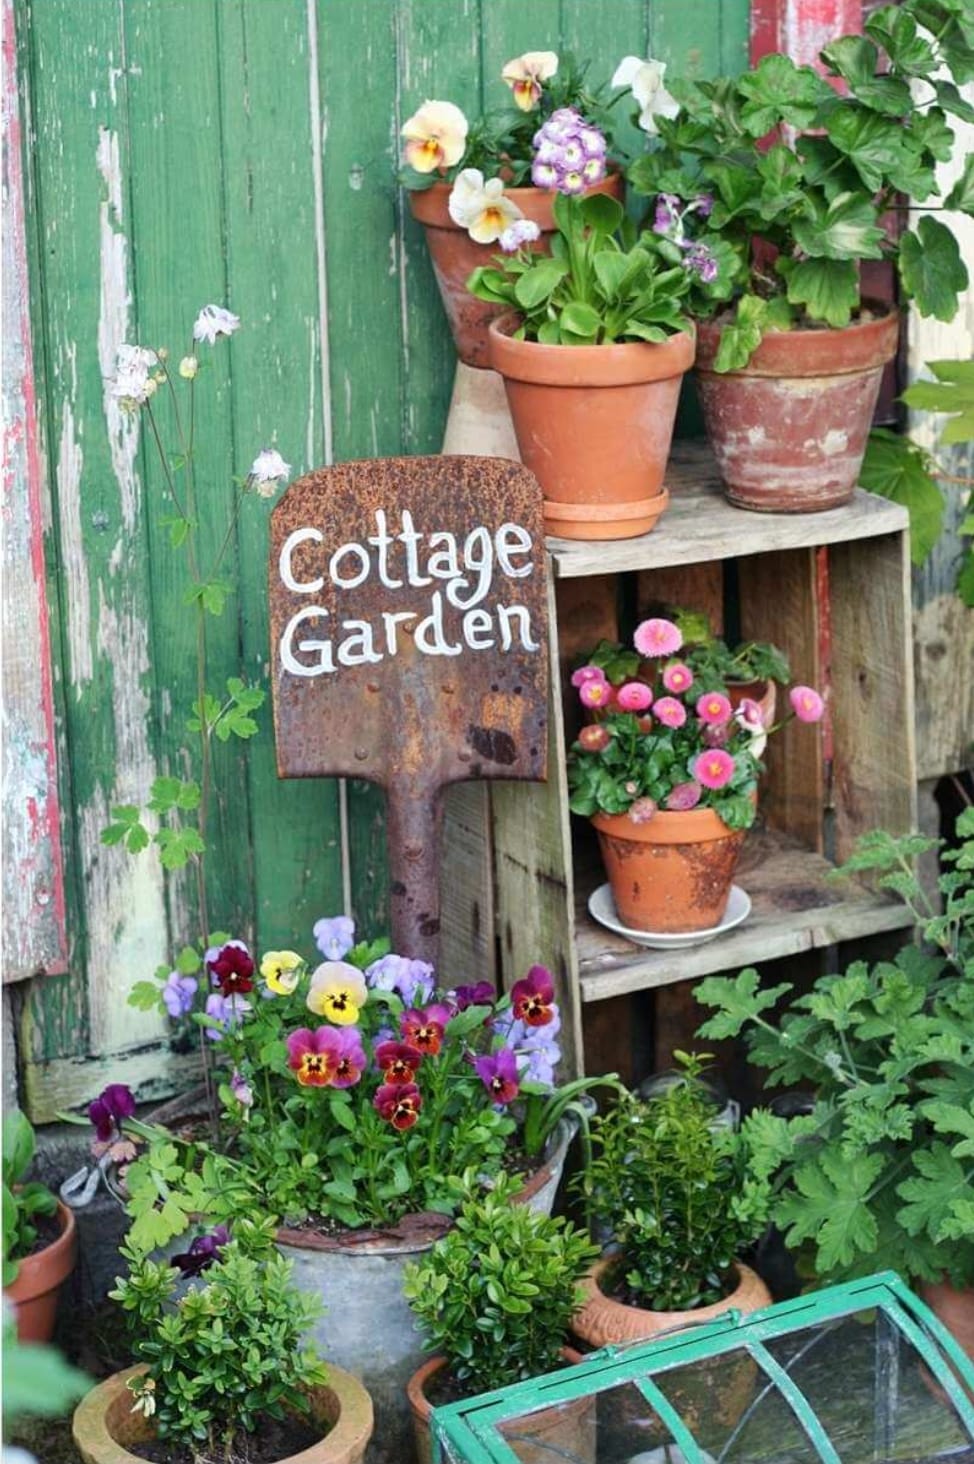 Best cottage style garden ideas for landscaping #9